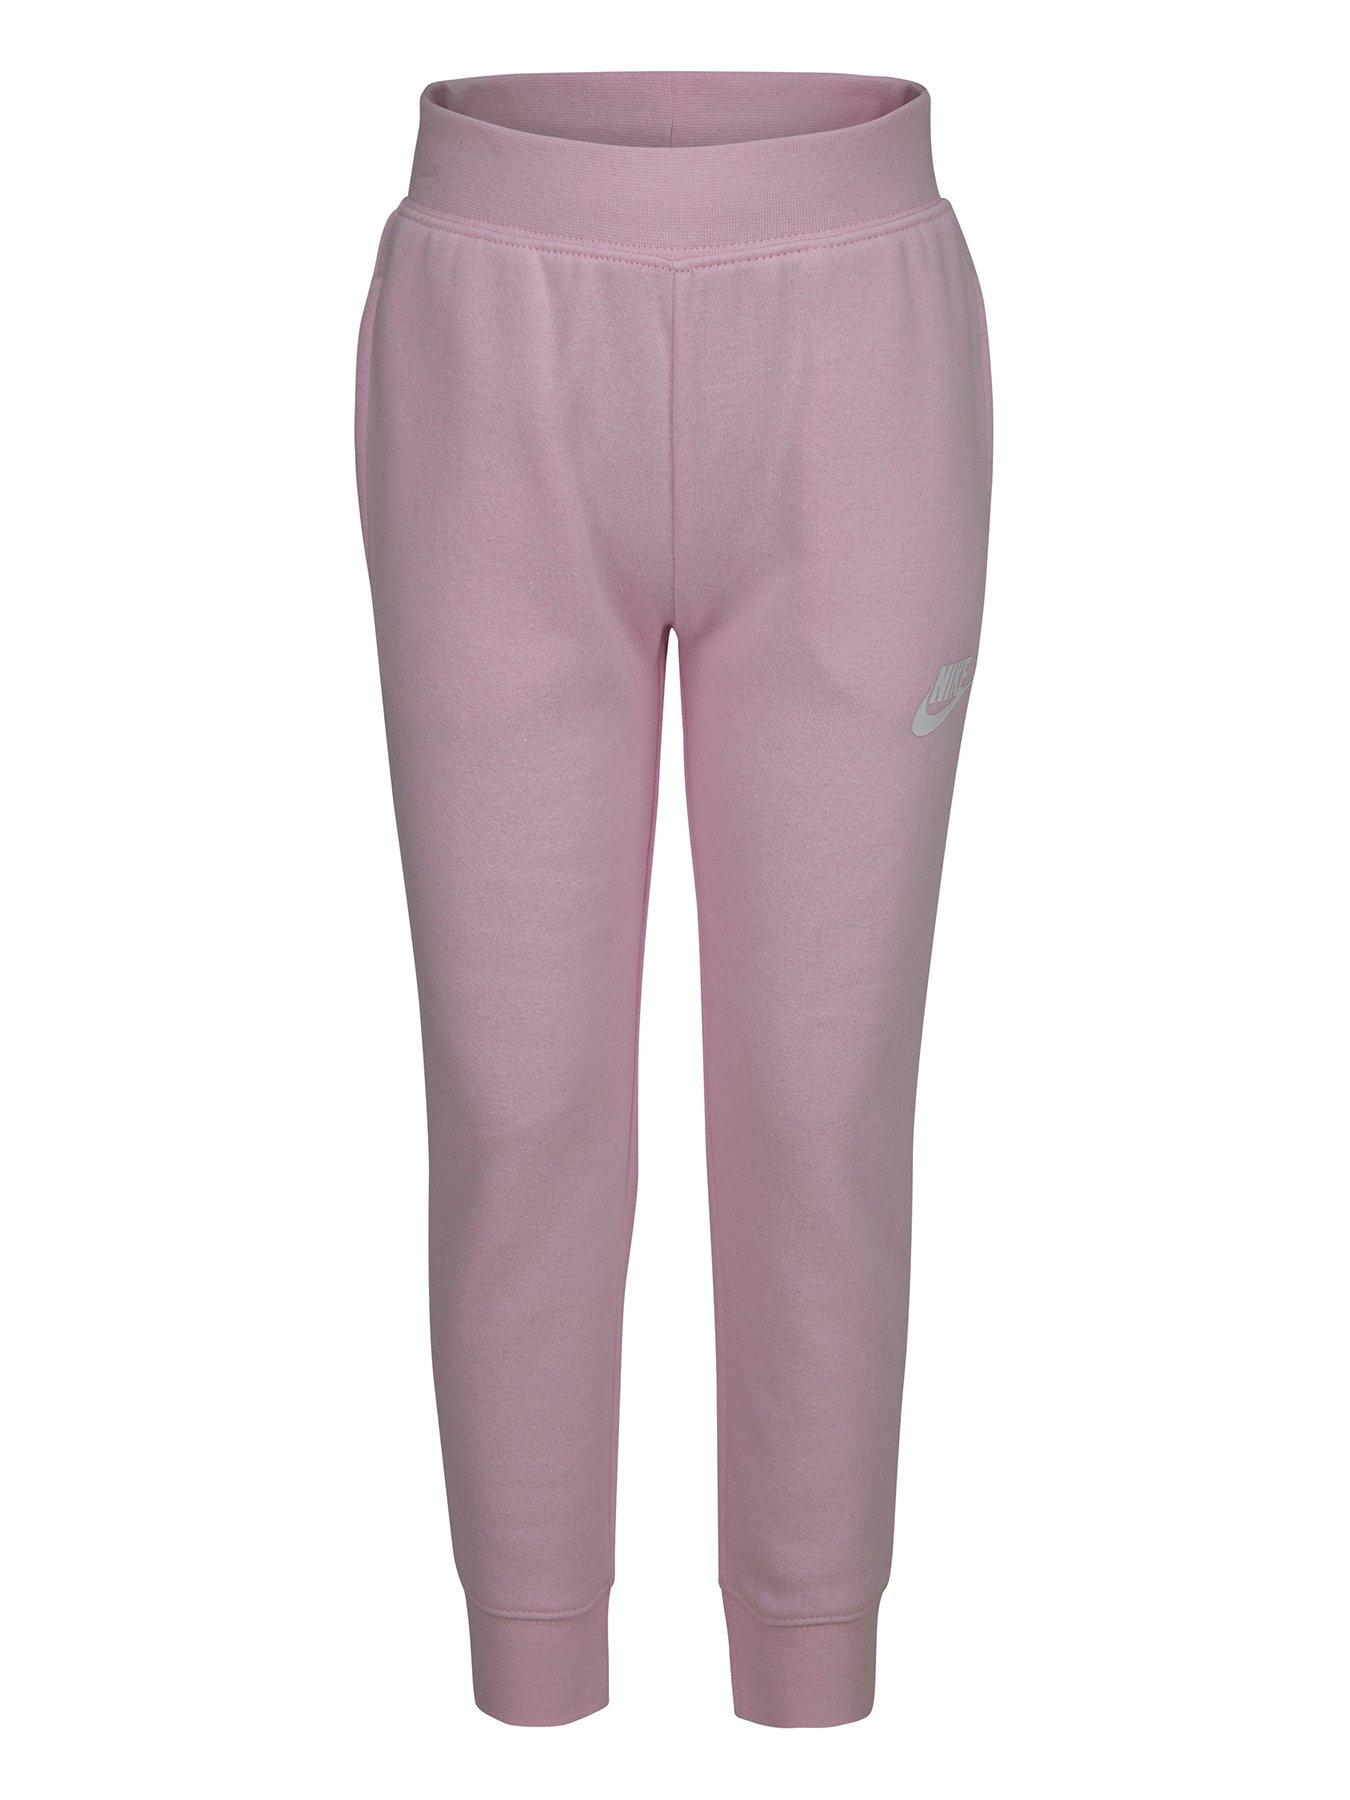  Younger Club Fleece Joggers - Pink